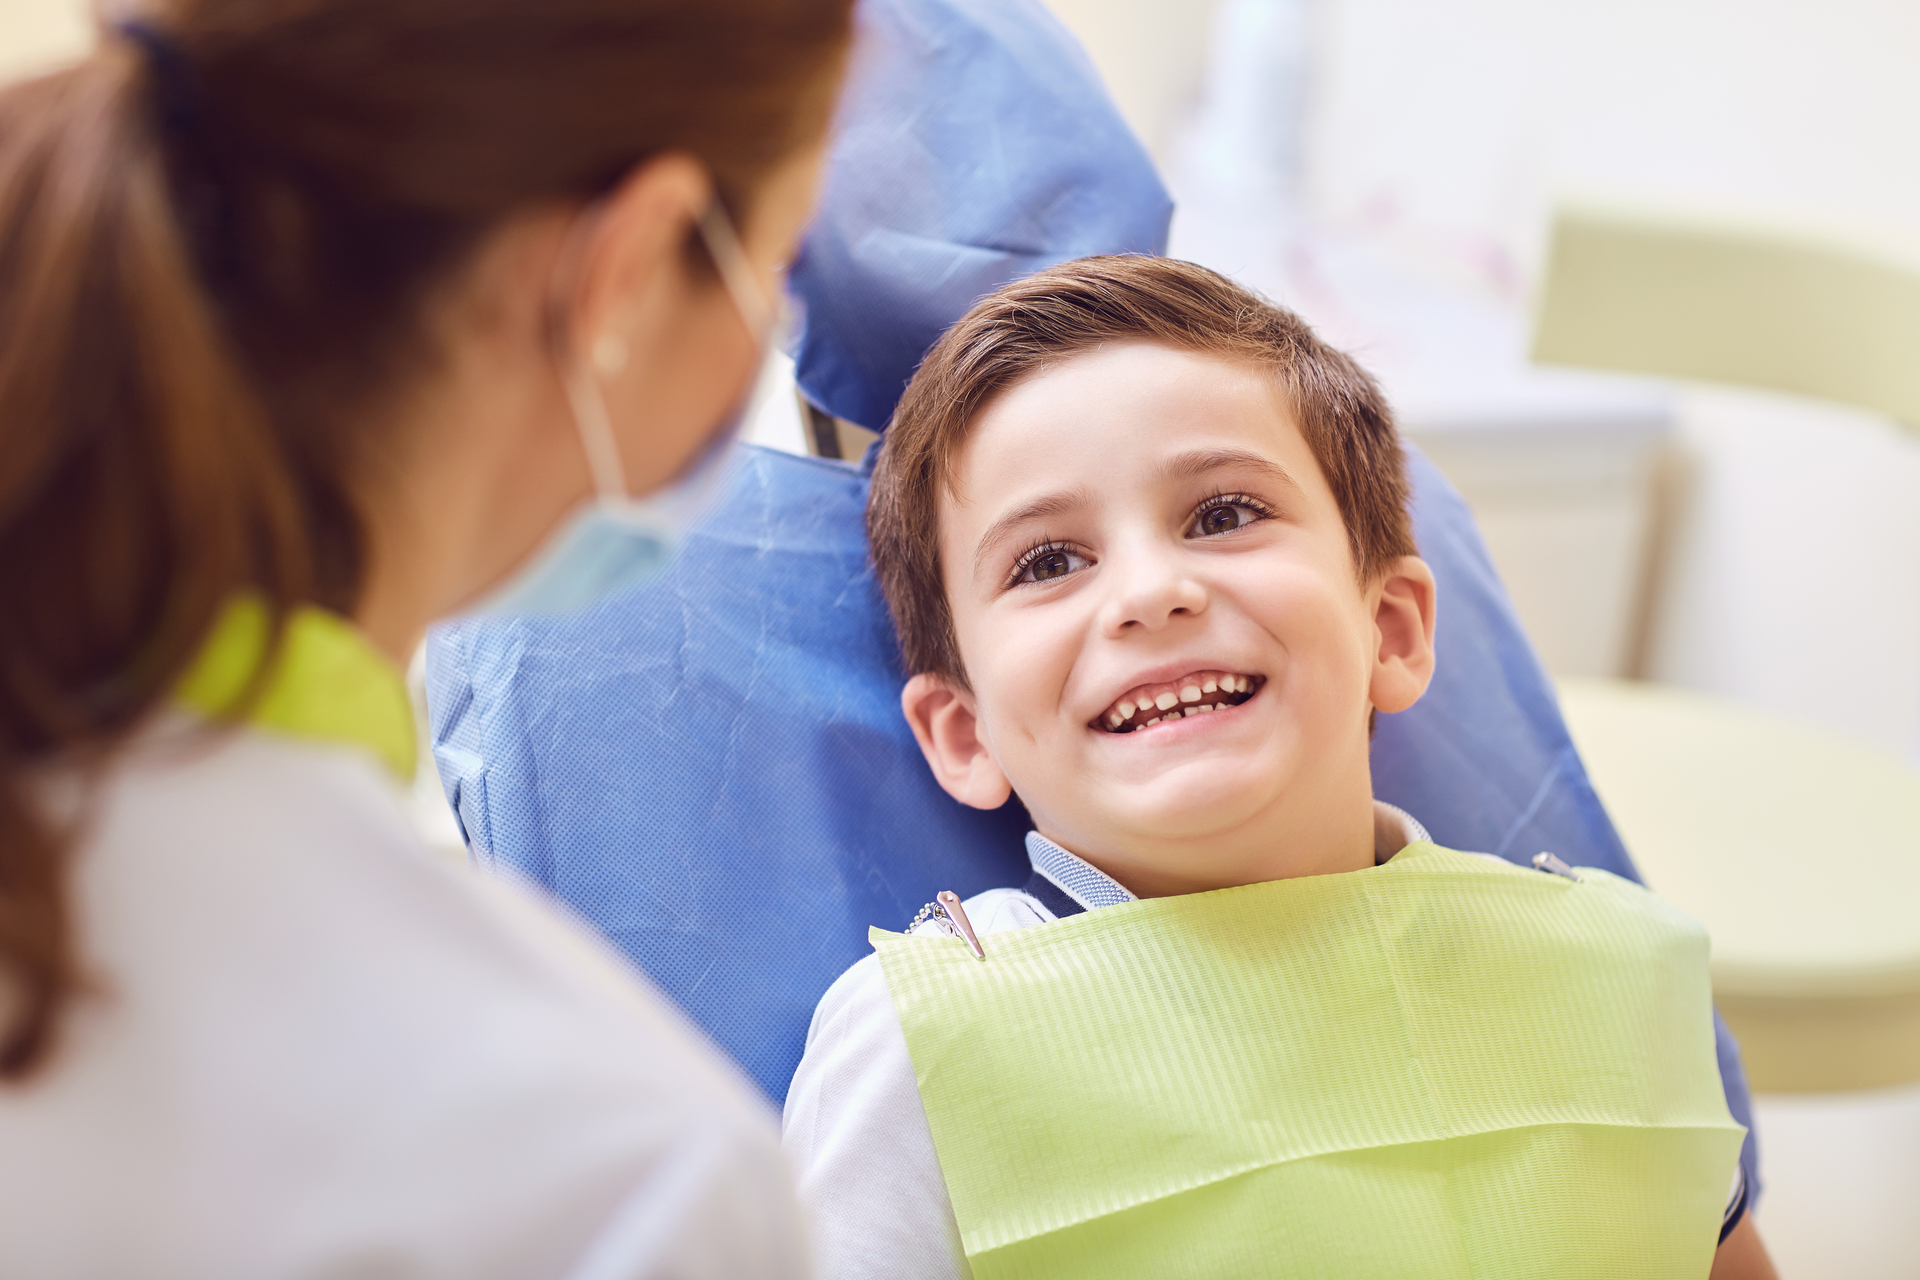 A child with a dentist in a dental office